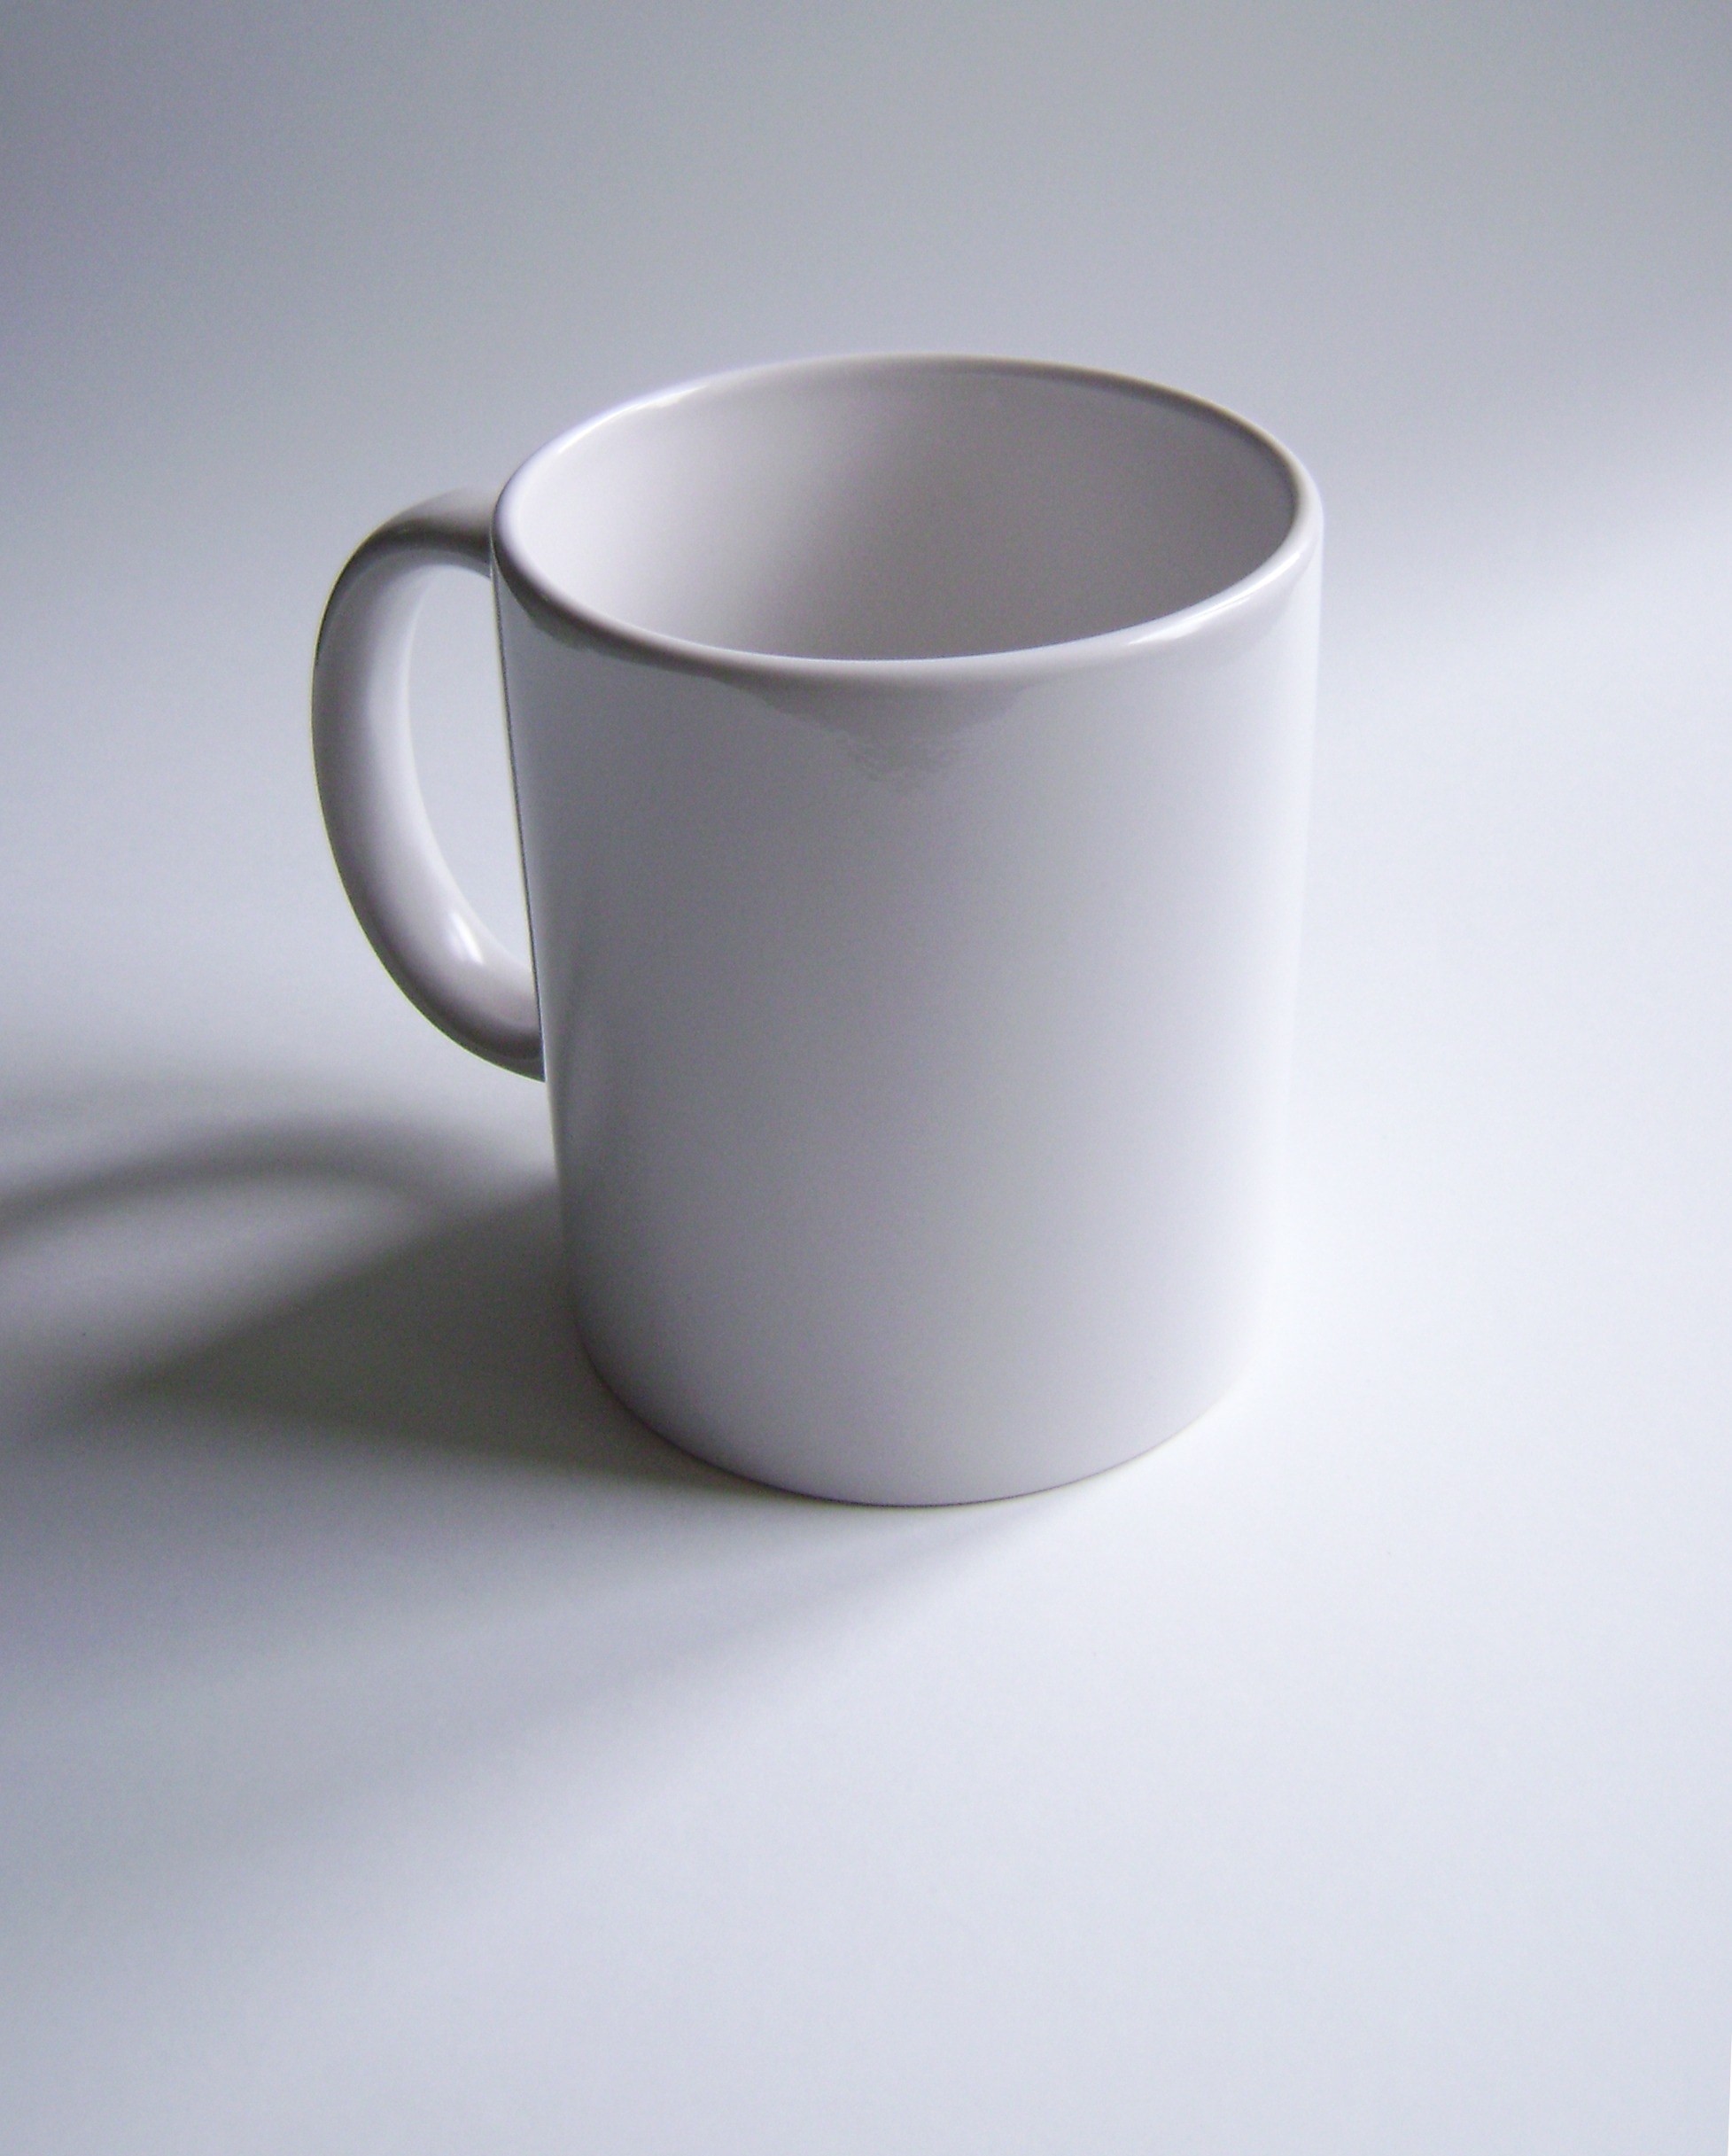 close up photography of a white ceramic mug on top of a white surface